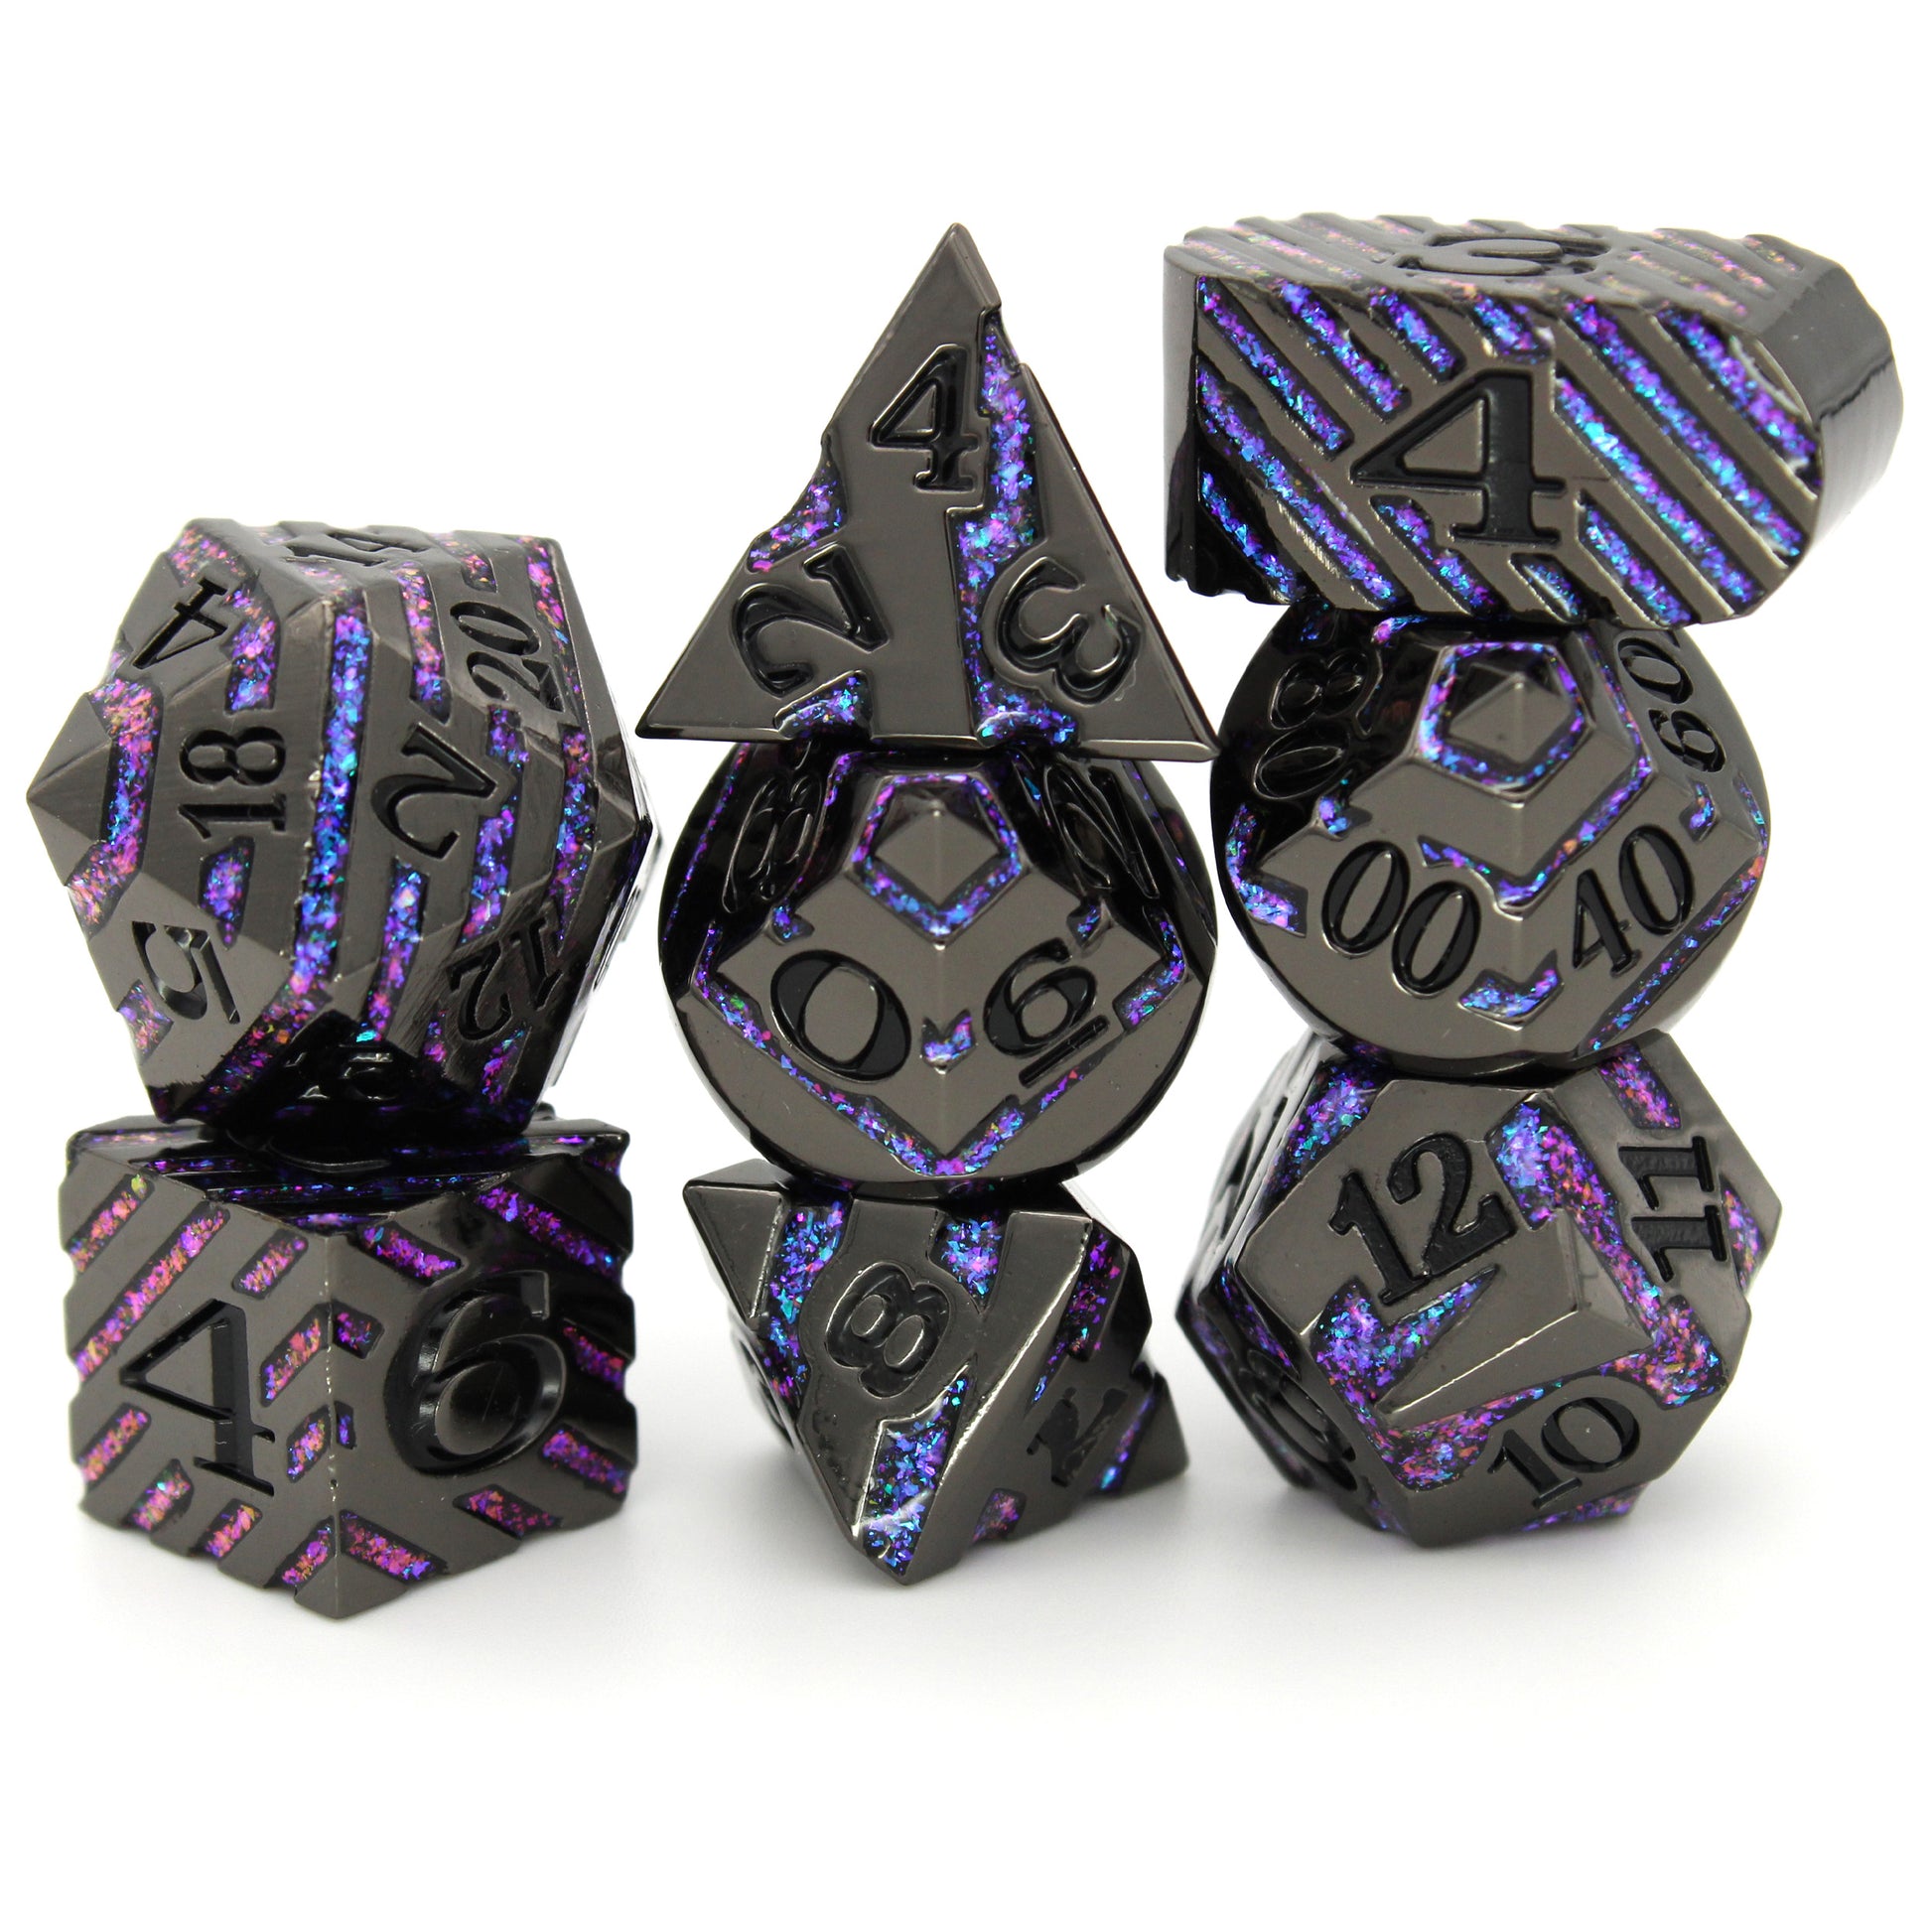 Arcane Vein is an 8-piece black metal set banded in a wraparound enamel fill of shimmering purple.